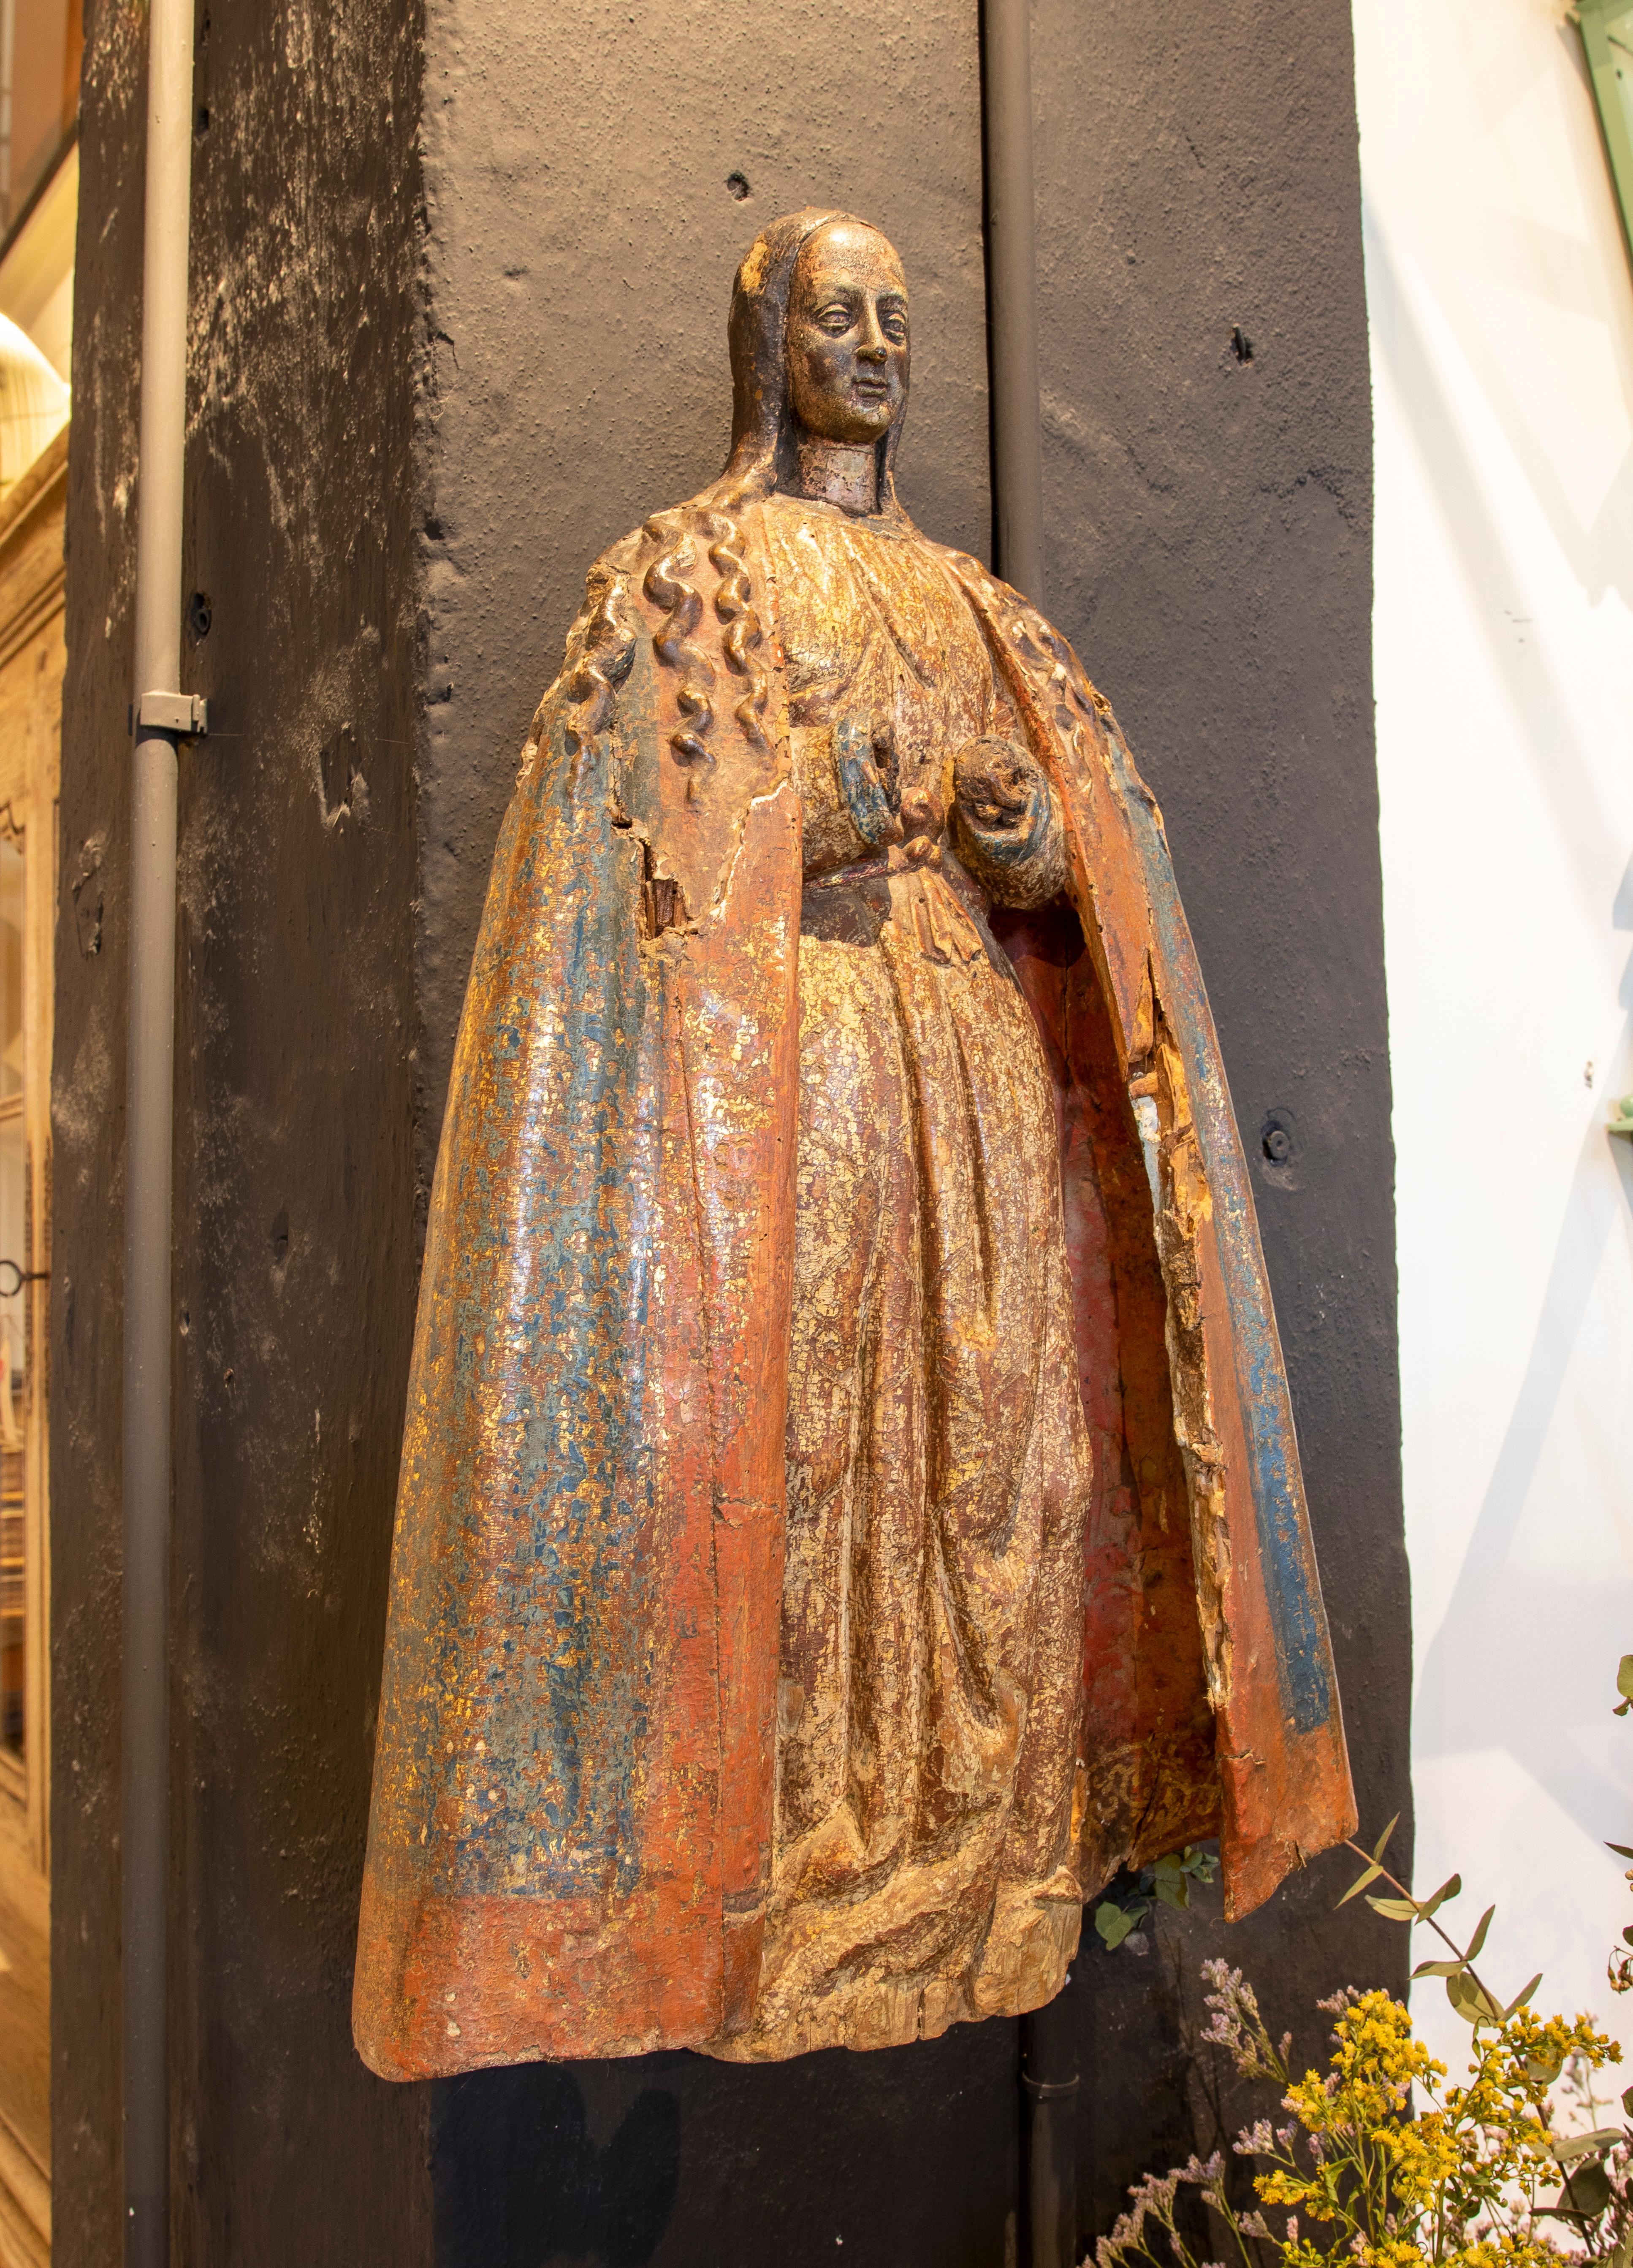 17th Century Portuguese Sculpture of a Polychromed Virgin with Mantle 13